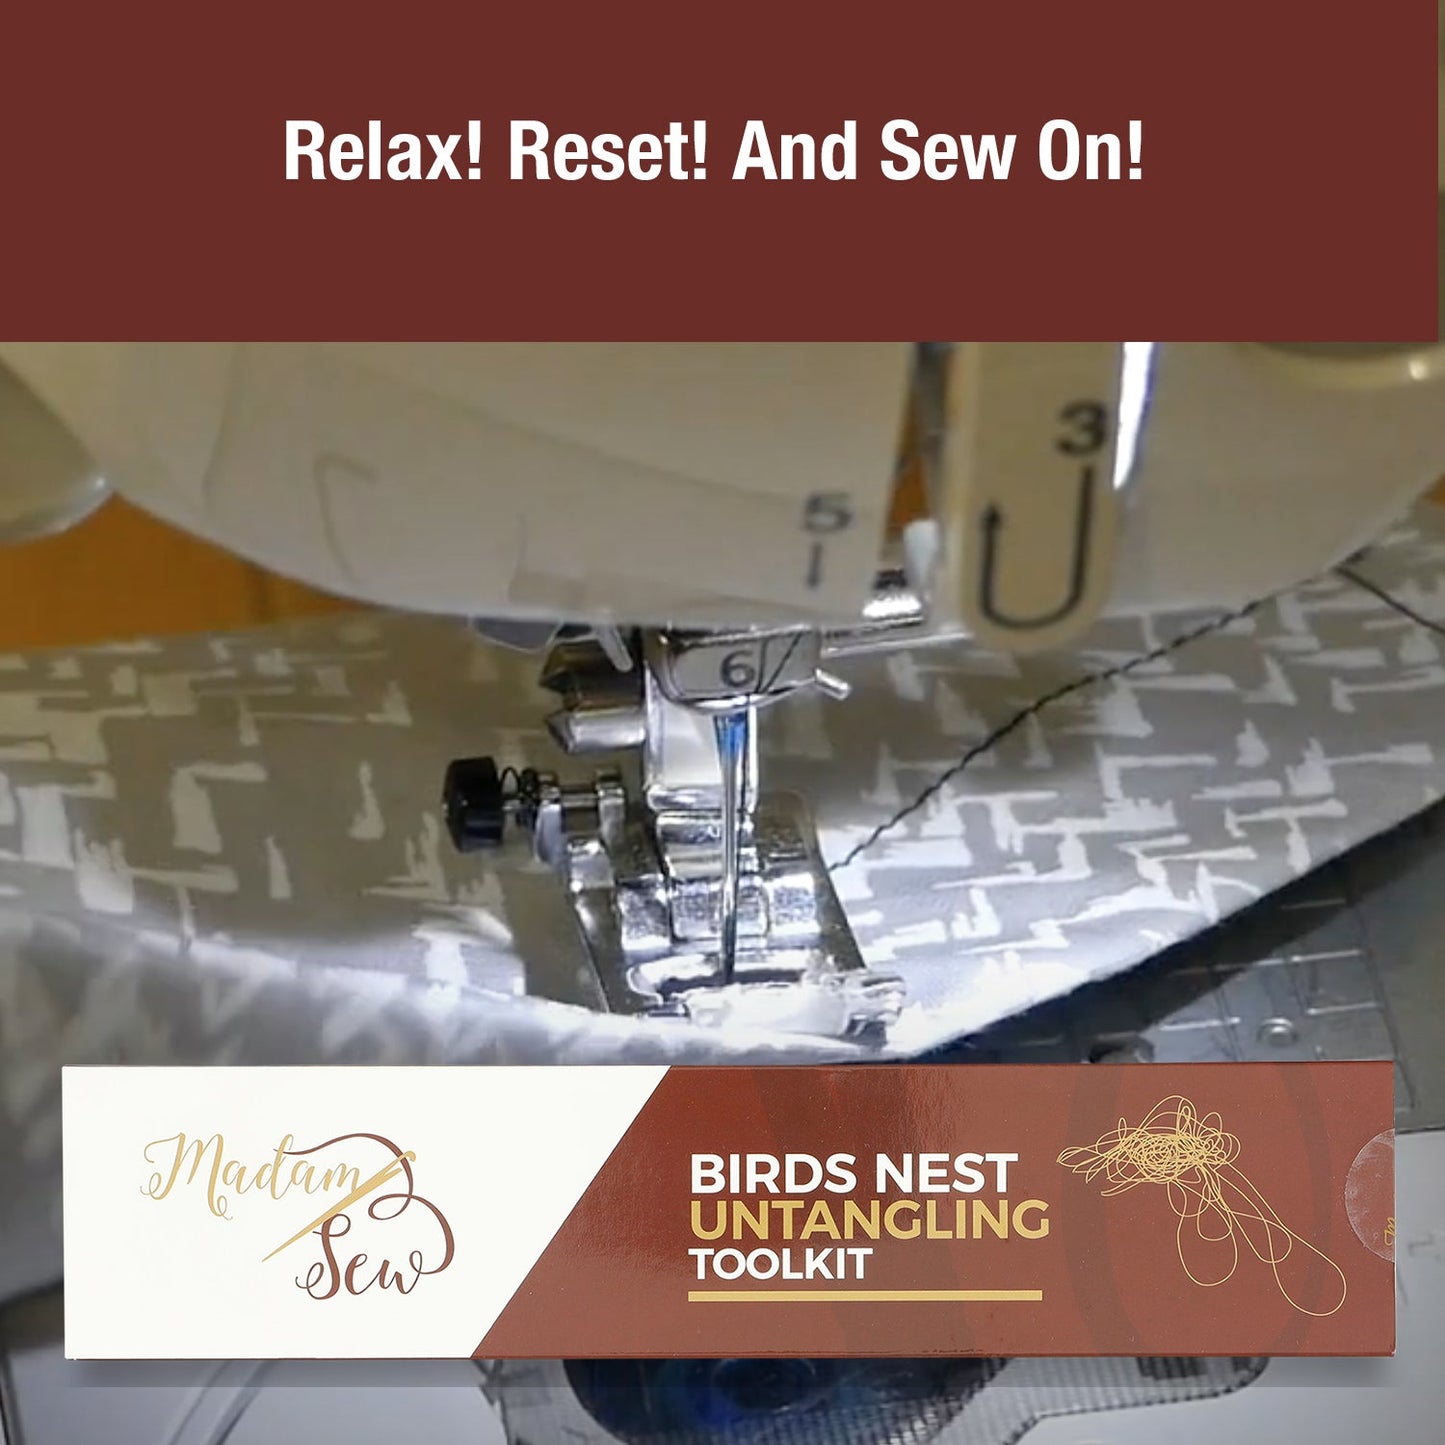 Birds Nest Toolkit - Your Way out of Sewing Machine Birdnesting